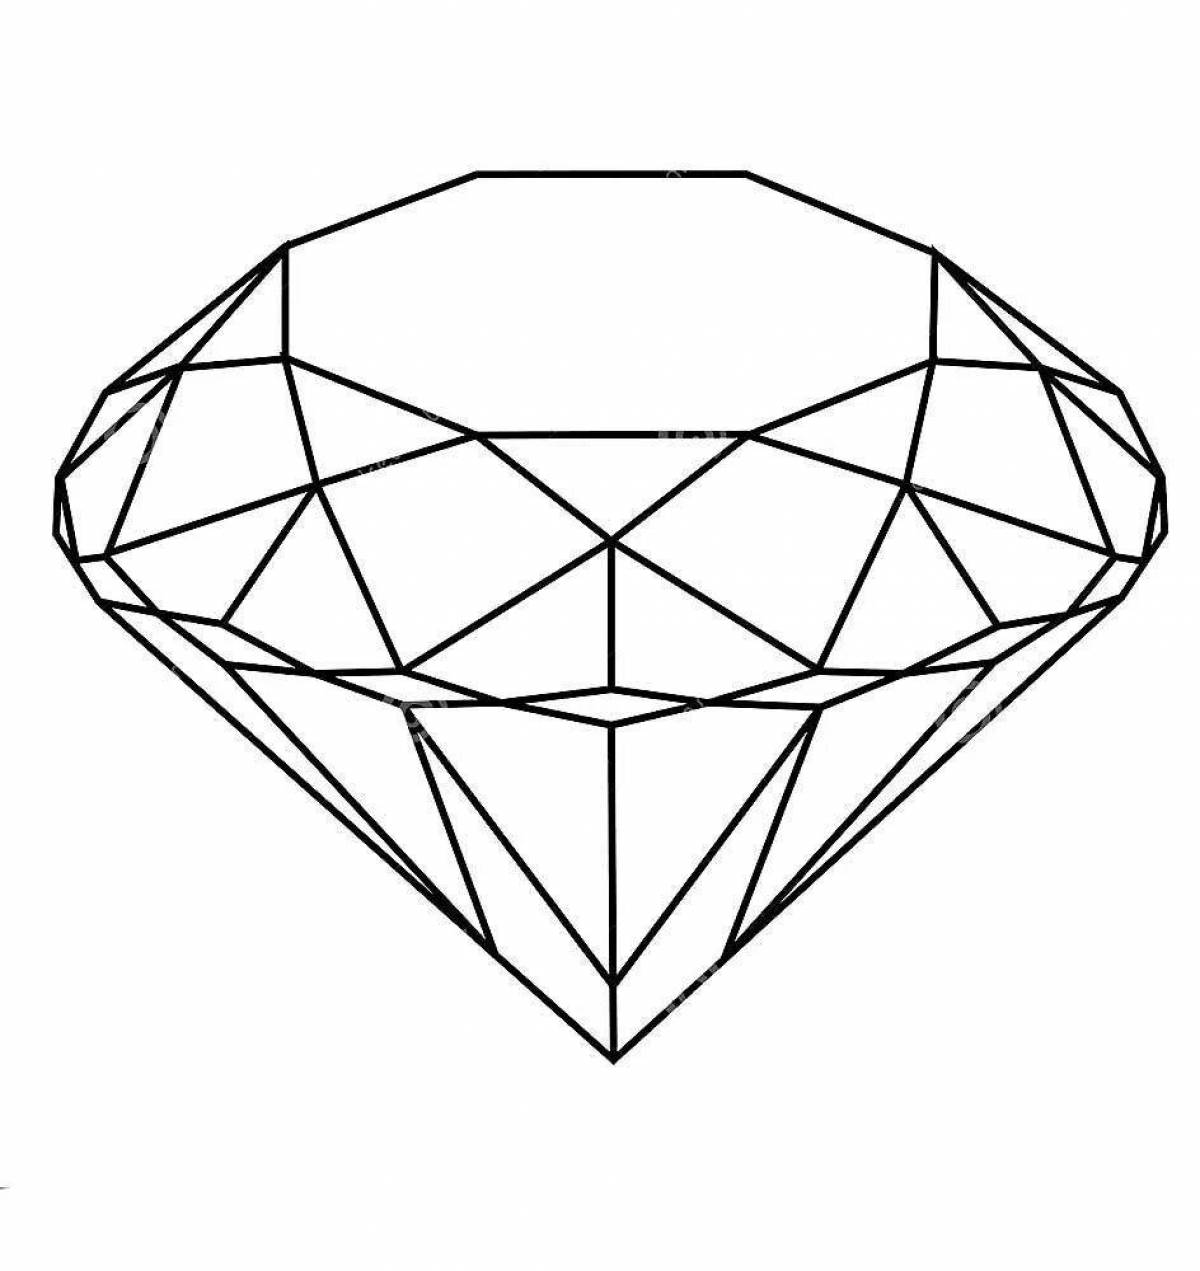 Playful diamond coloring page for kids